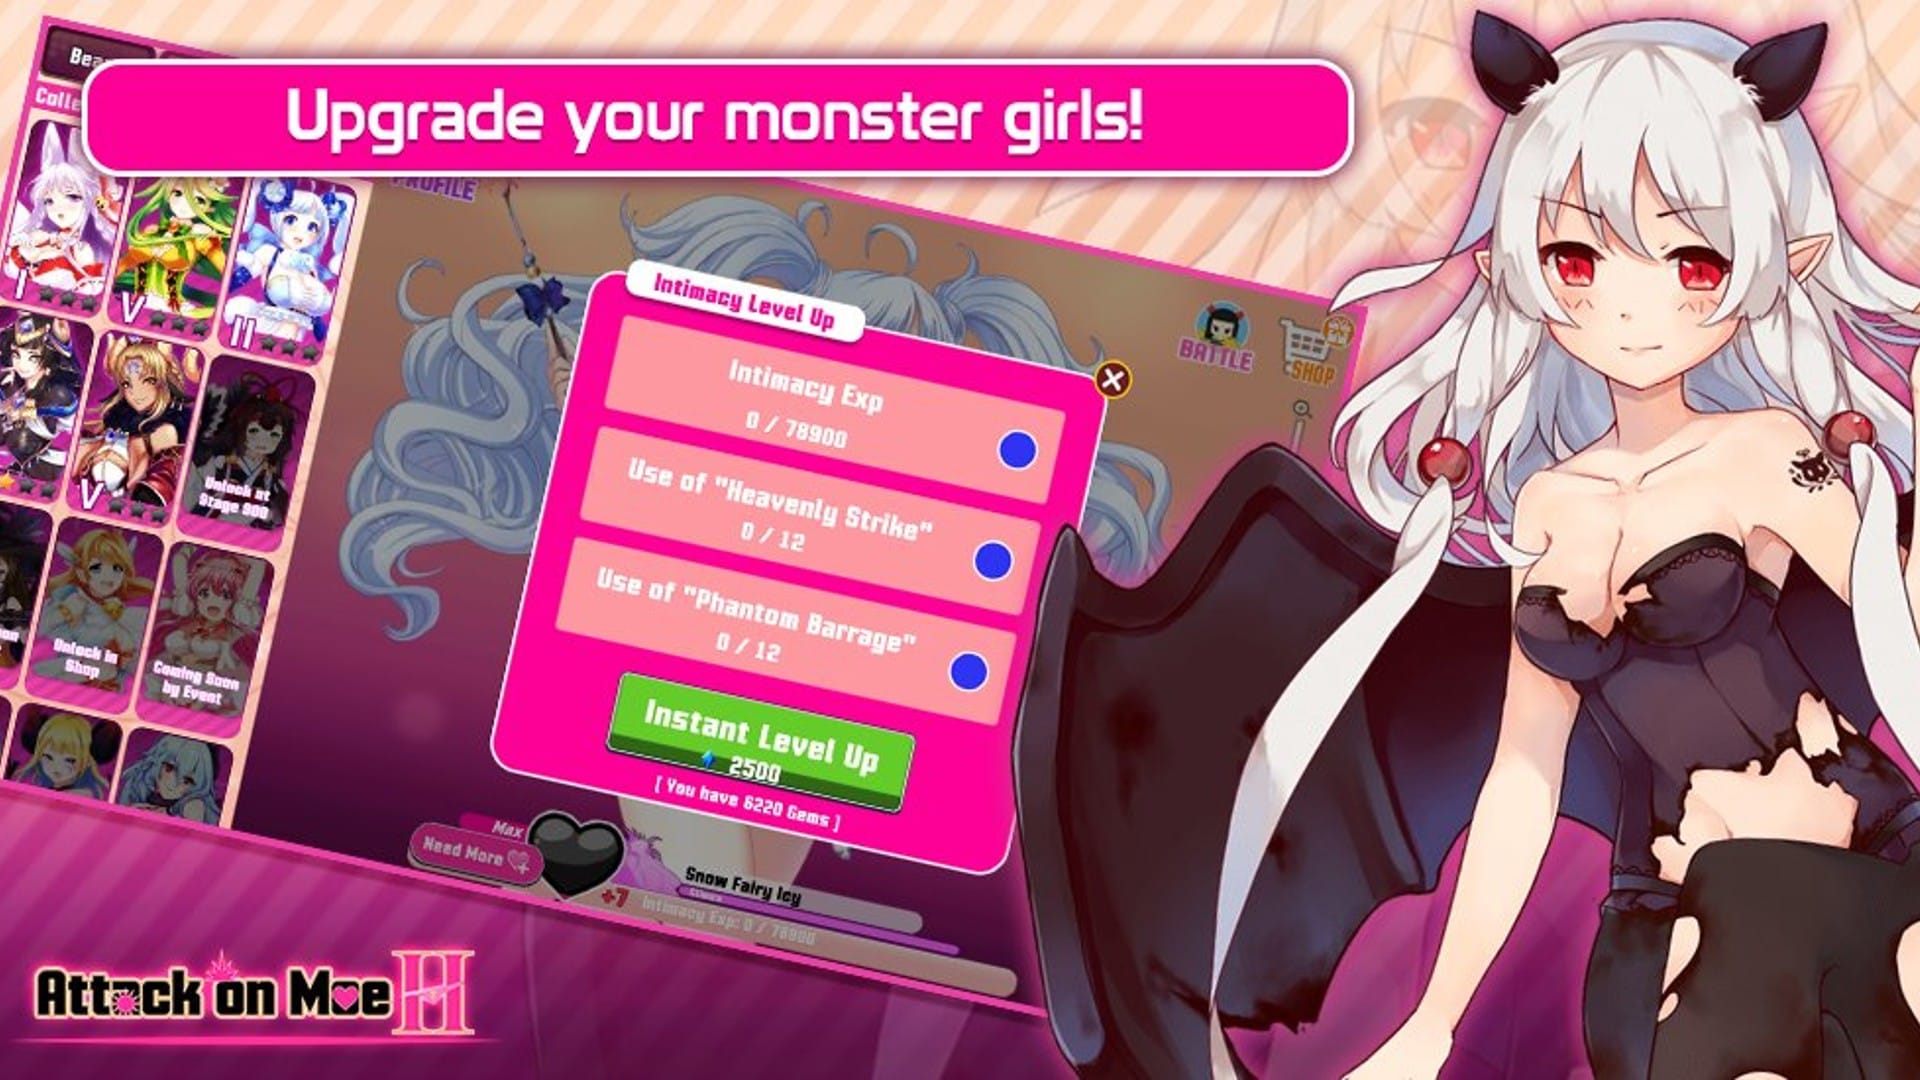 Nutaku Launches Project Qt X Attack On Moe H Crossover Event Techraptor